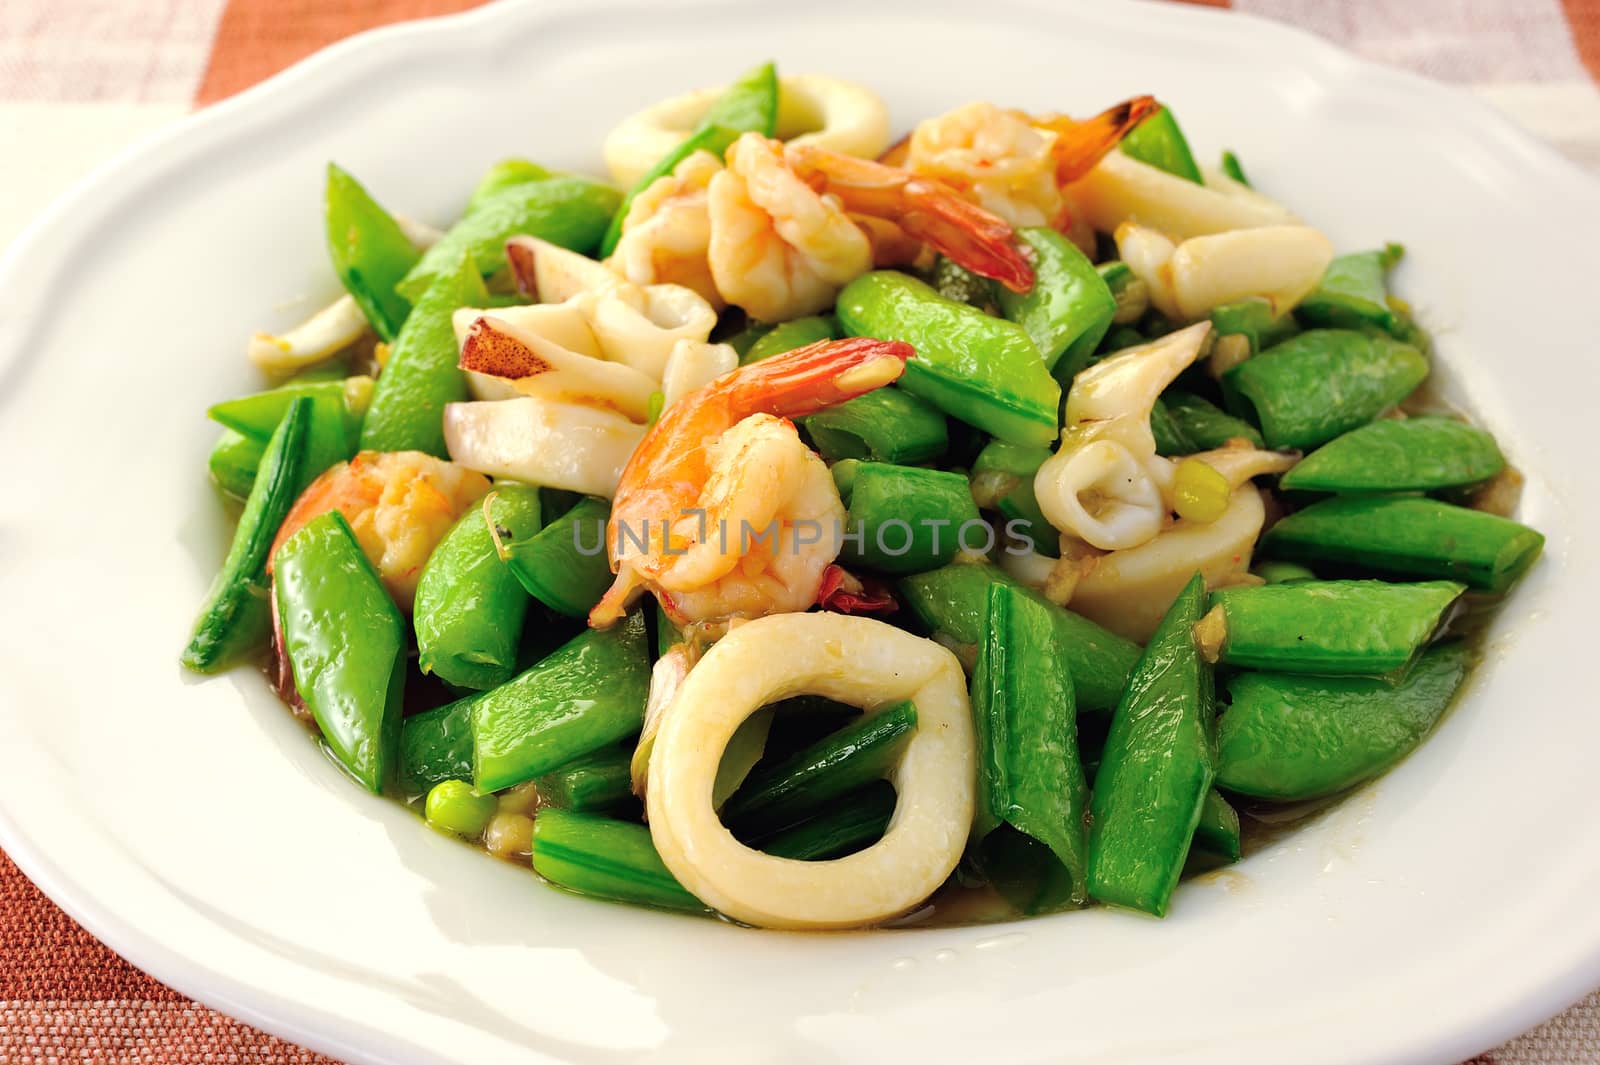 Seafoods - Shrimps,  Squids with green peas